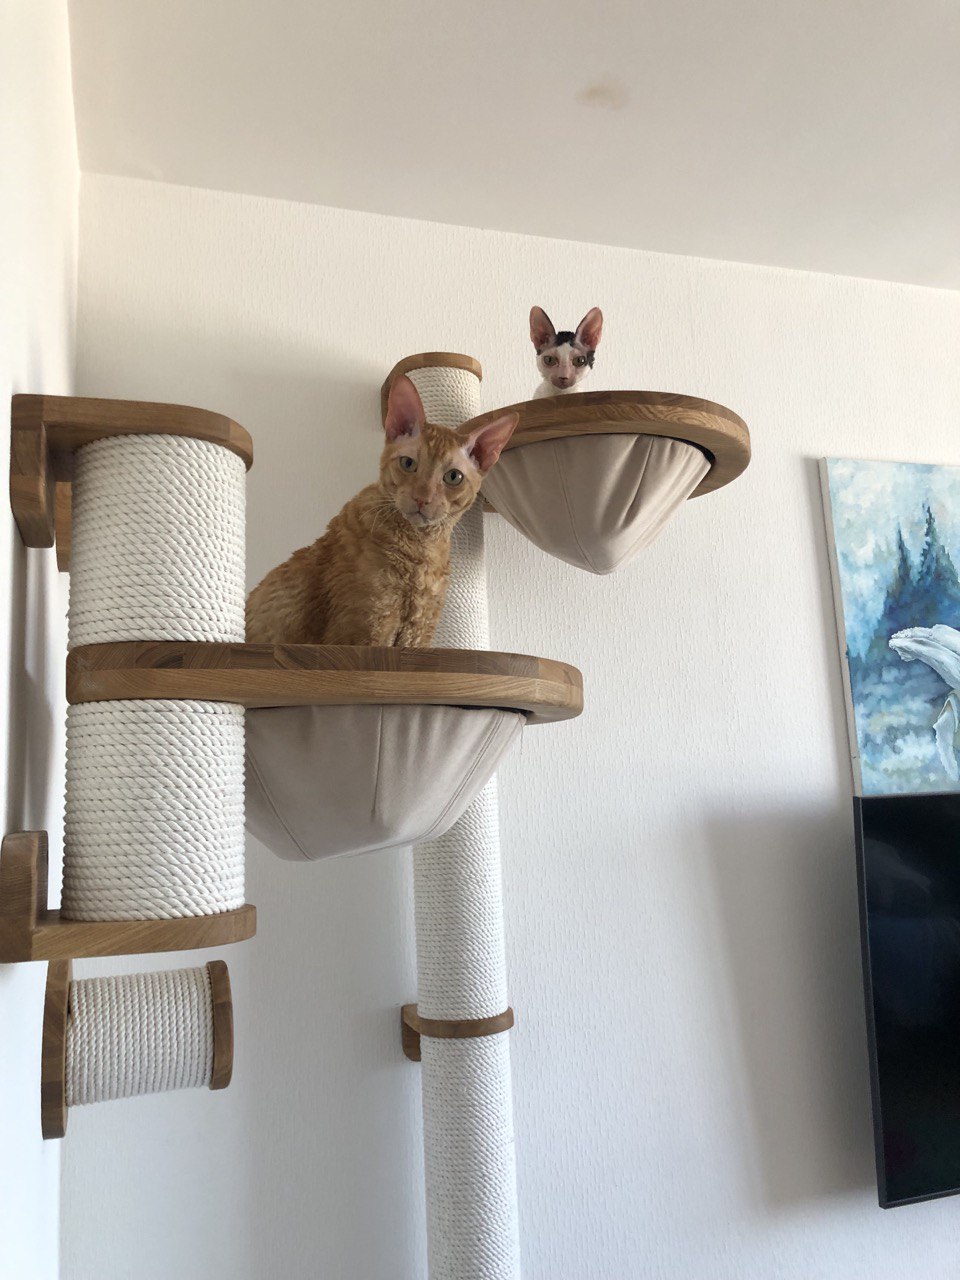 Flynn and Klepa meet the guests, sitting in the wall scratching post